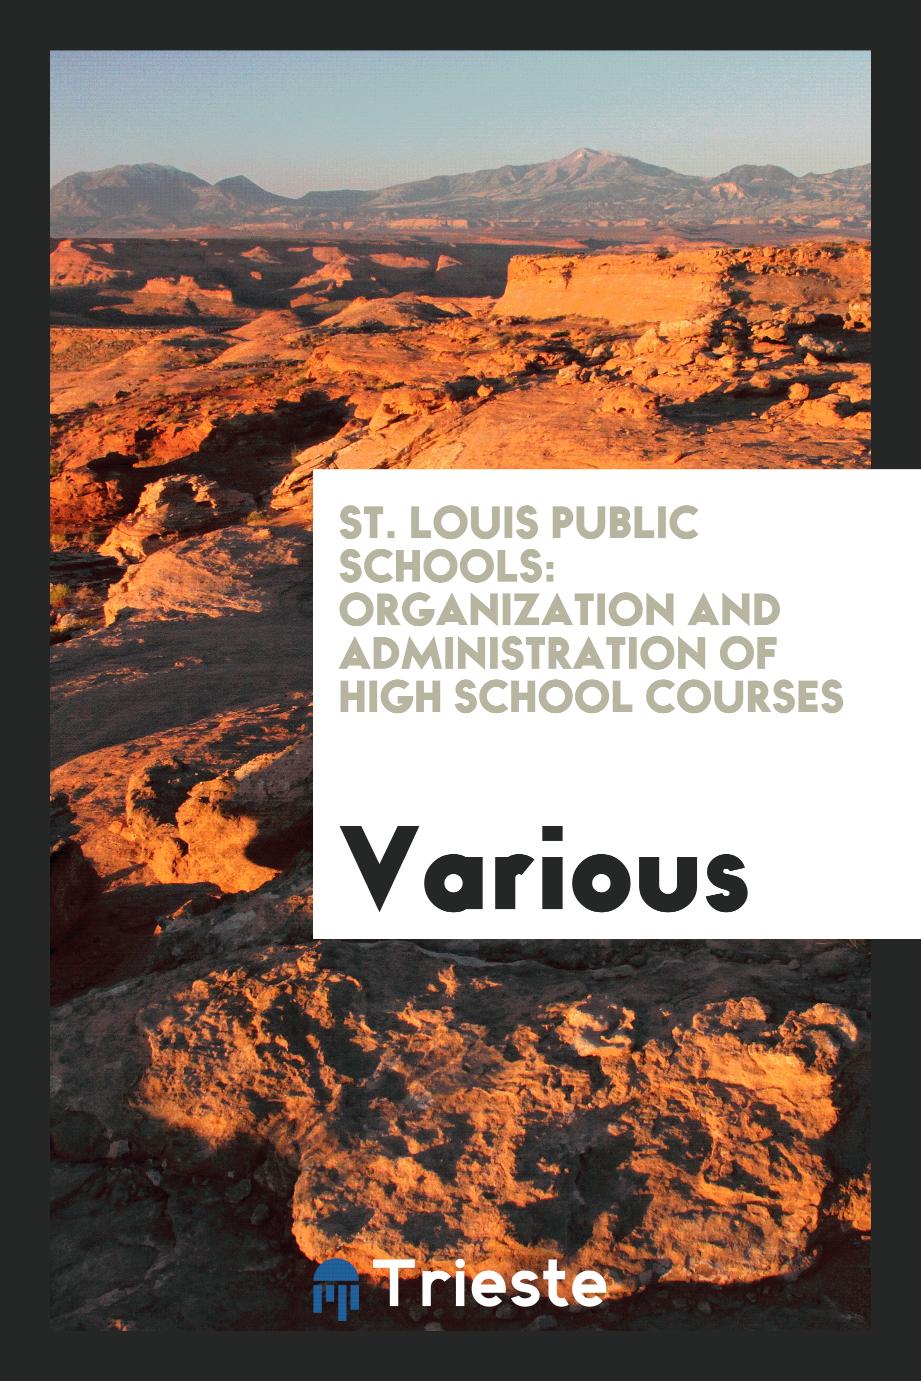 St. Louis Public Schools: Organization and Administration of High School Courses